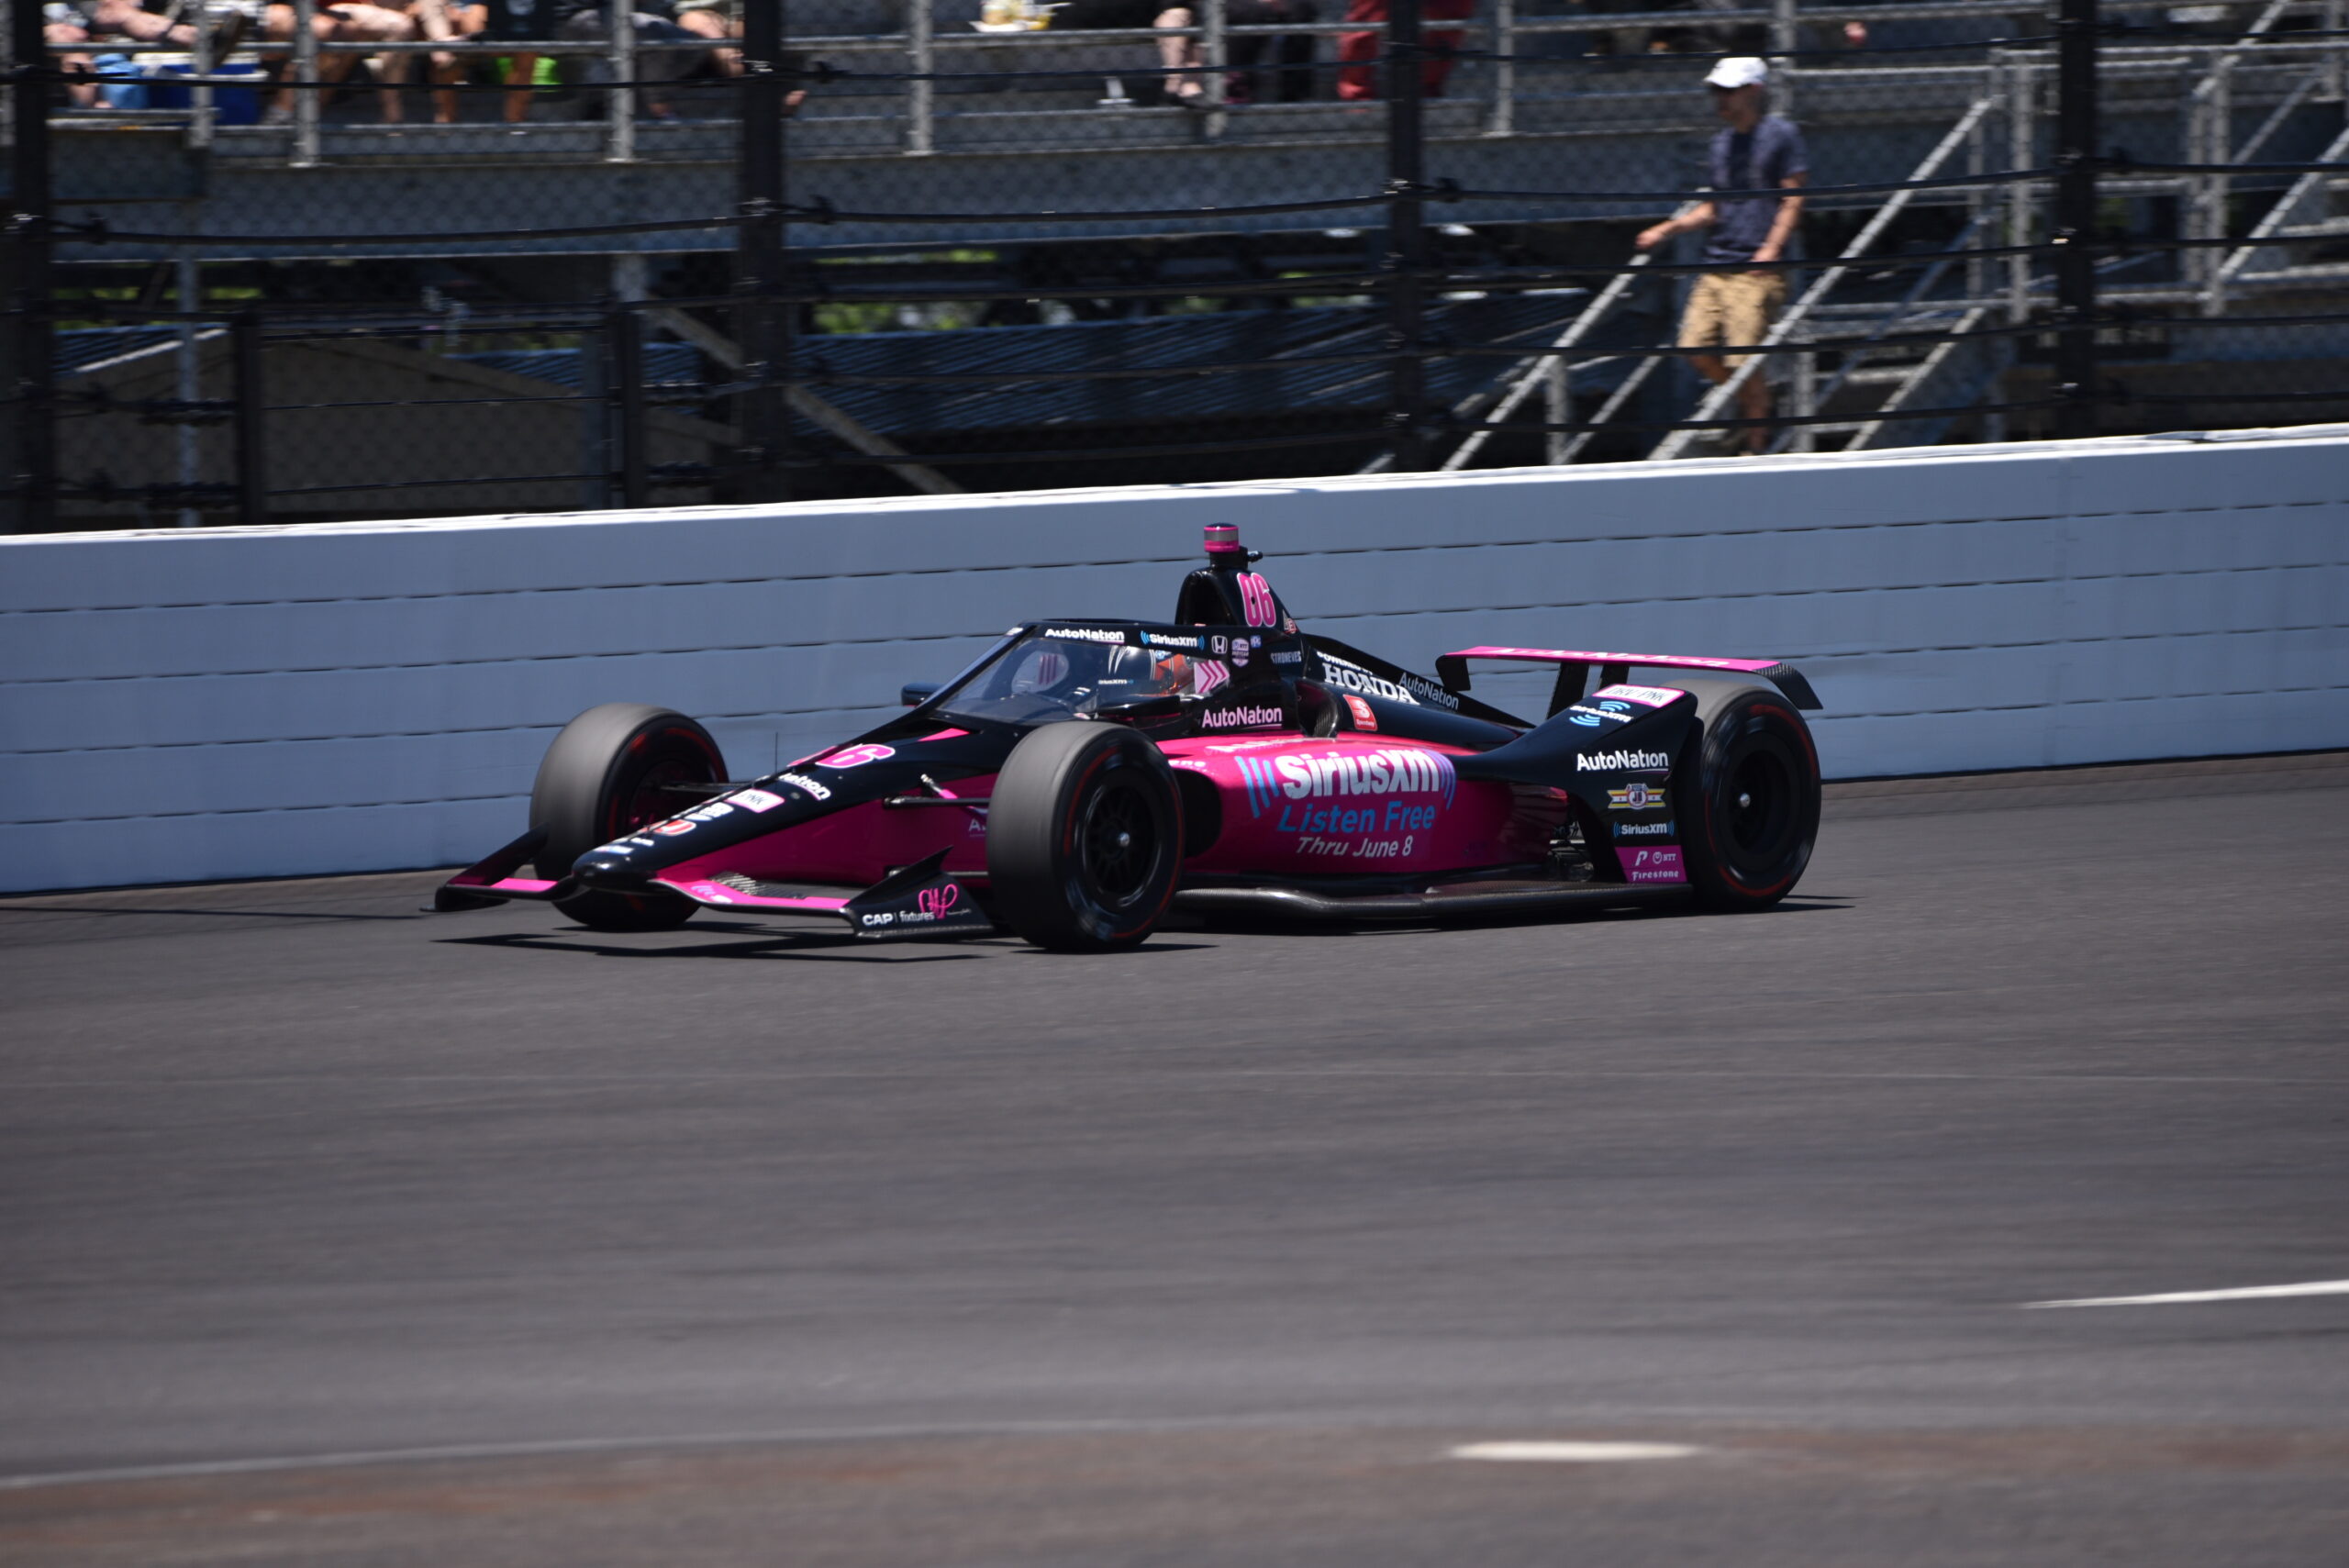 Here, Helio Castroenves races another lap closer to another Indianapolis 500 win. (Photo: Luis Torres/The Podium Finish)